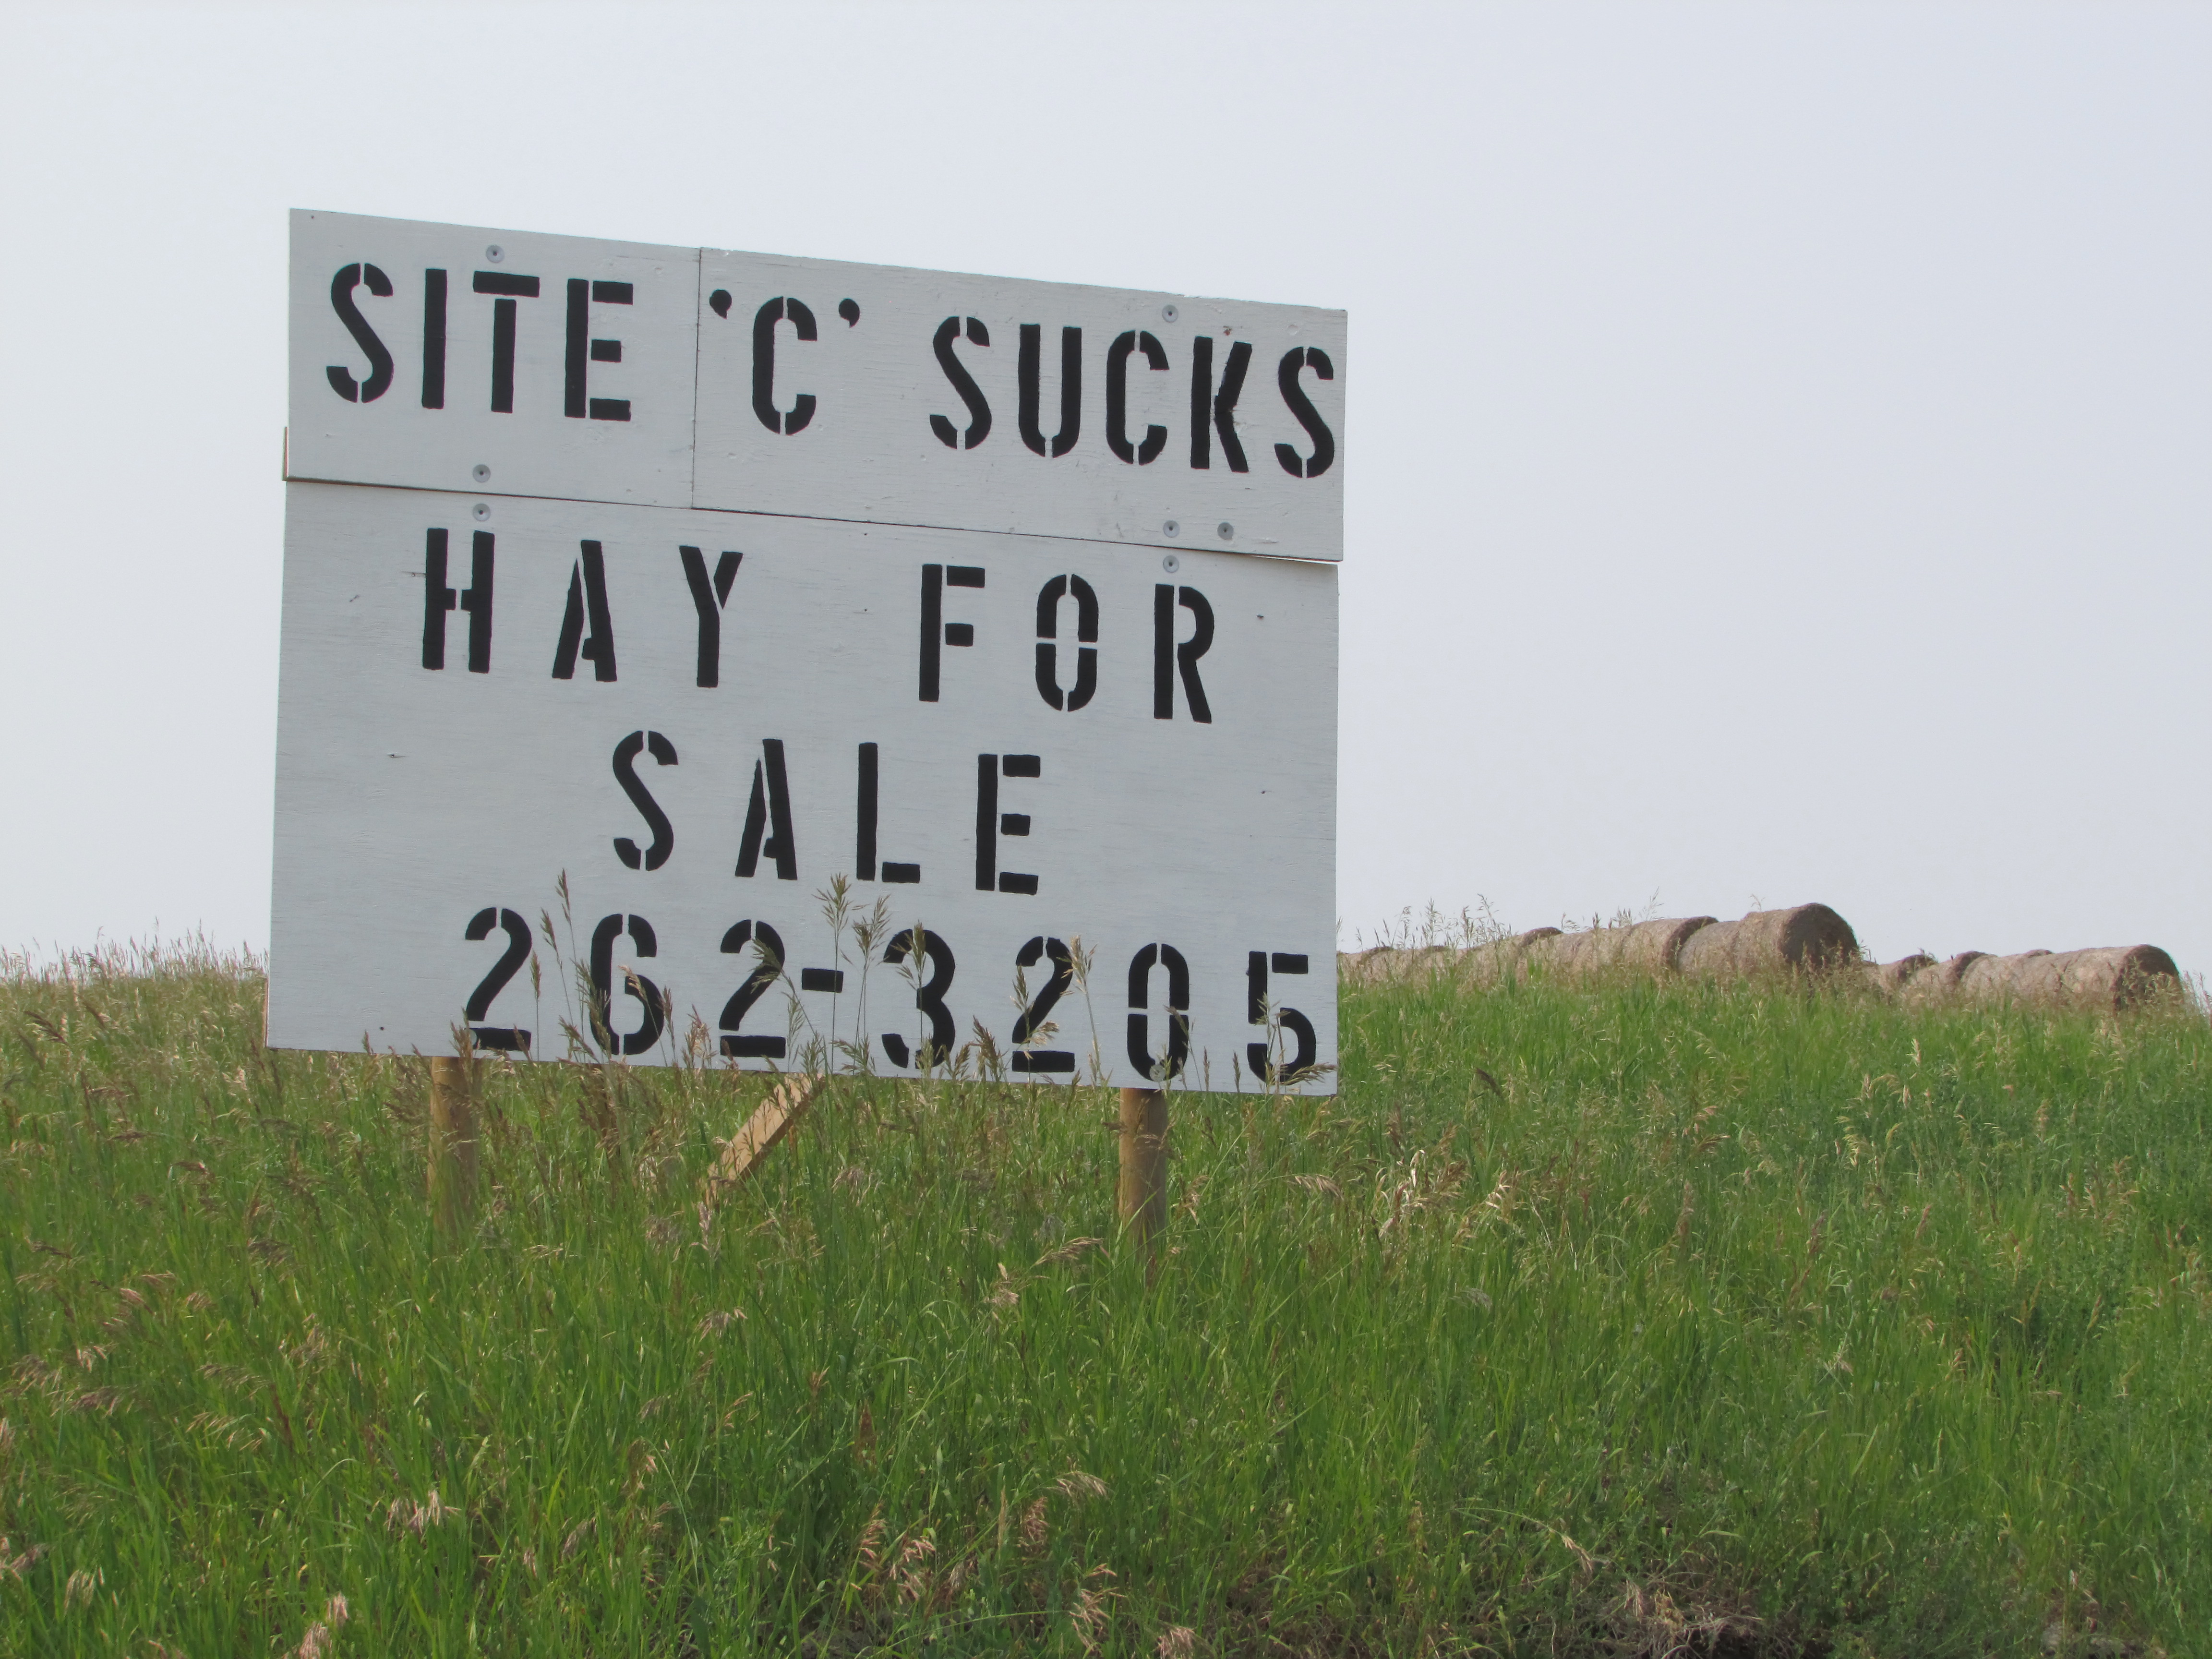 Sign in a grassy field with hay bales in the background